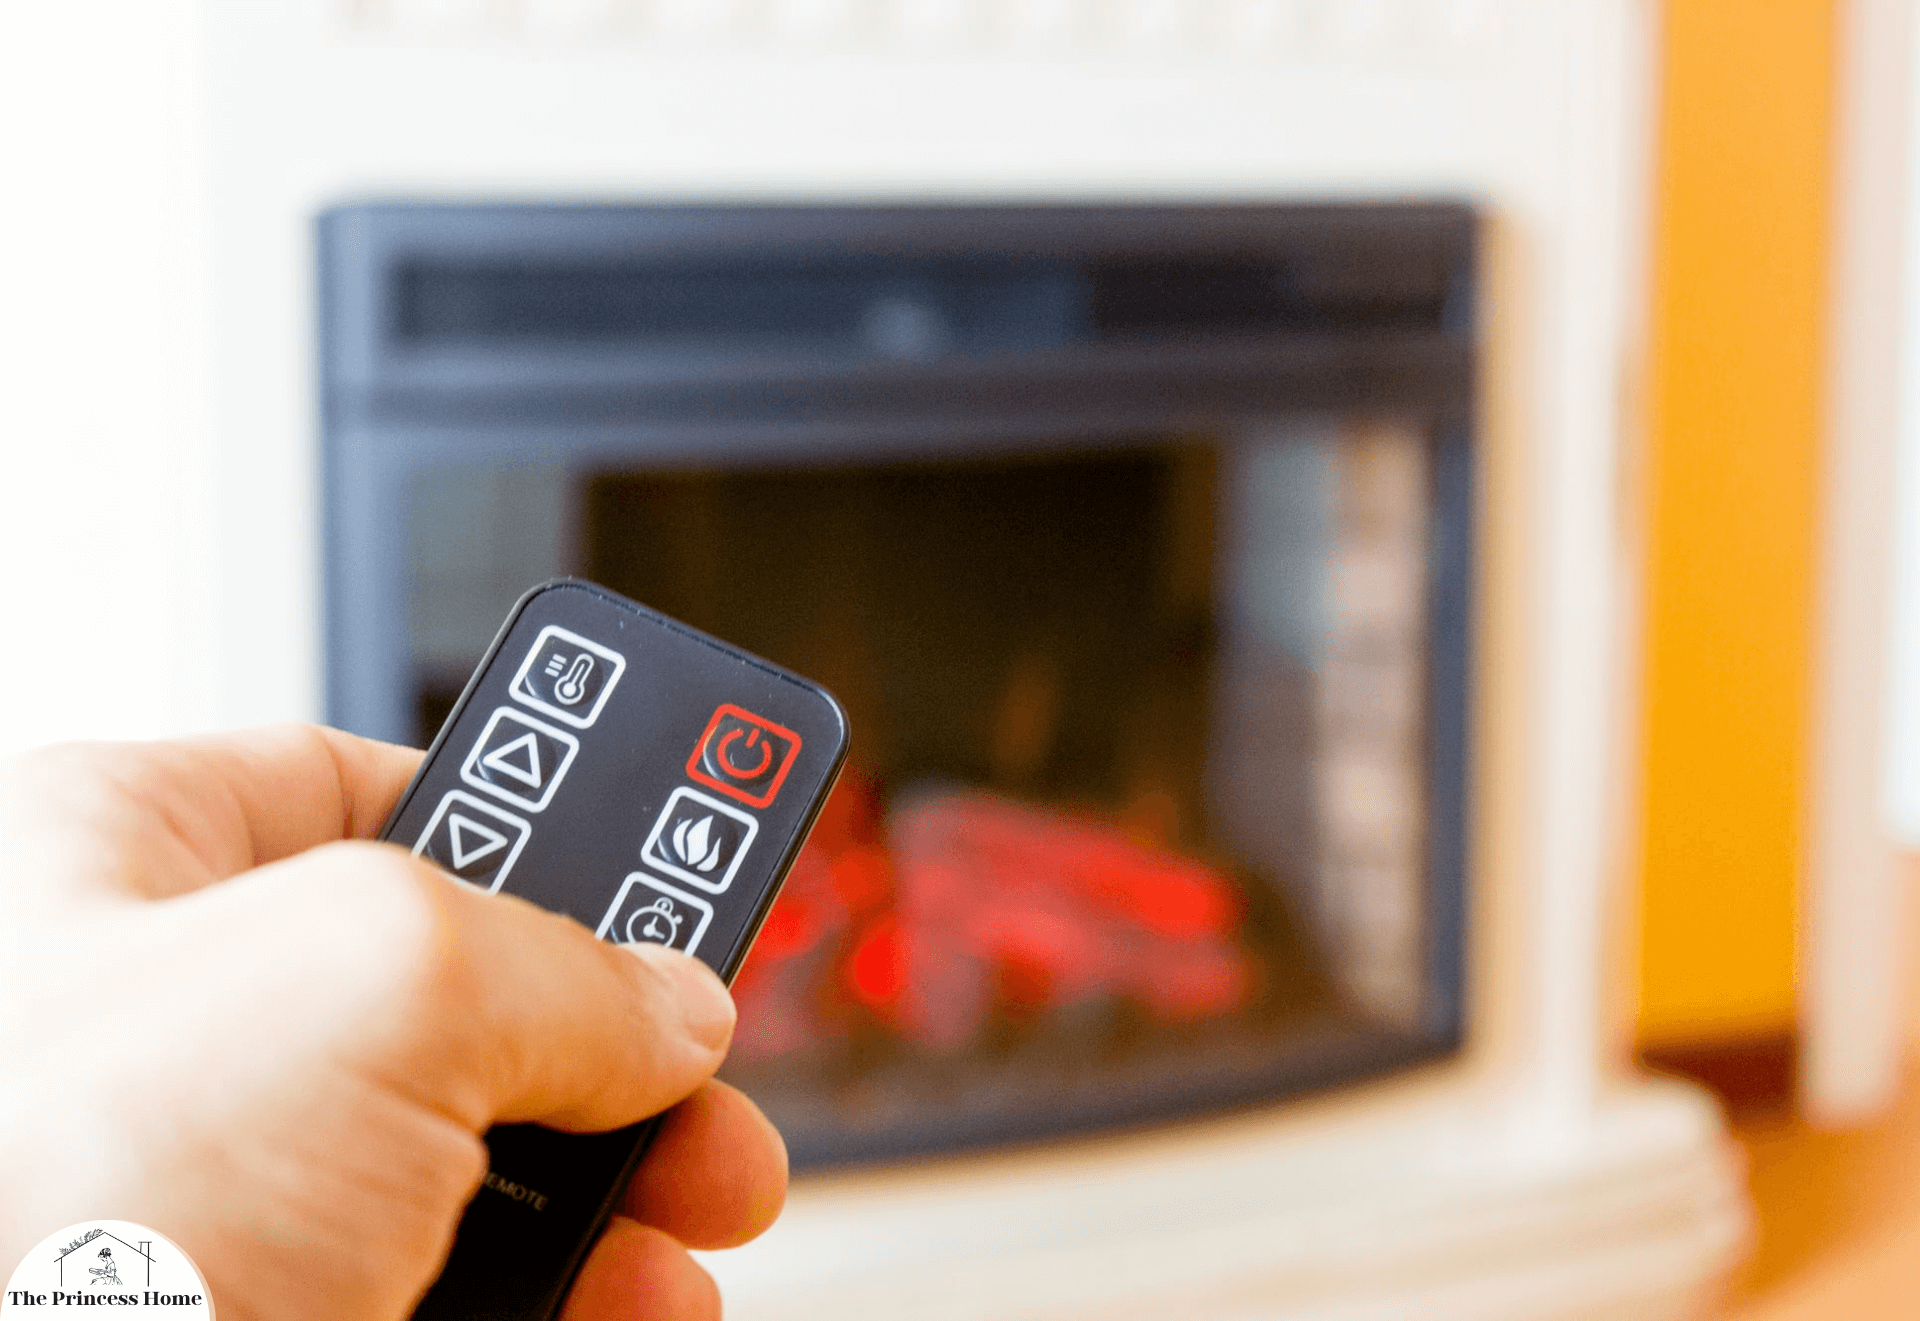 Smart Fireplaces:

Remote Controls and Smart Devices